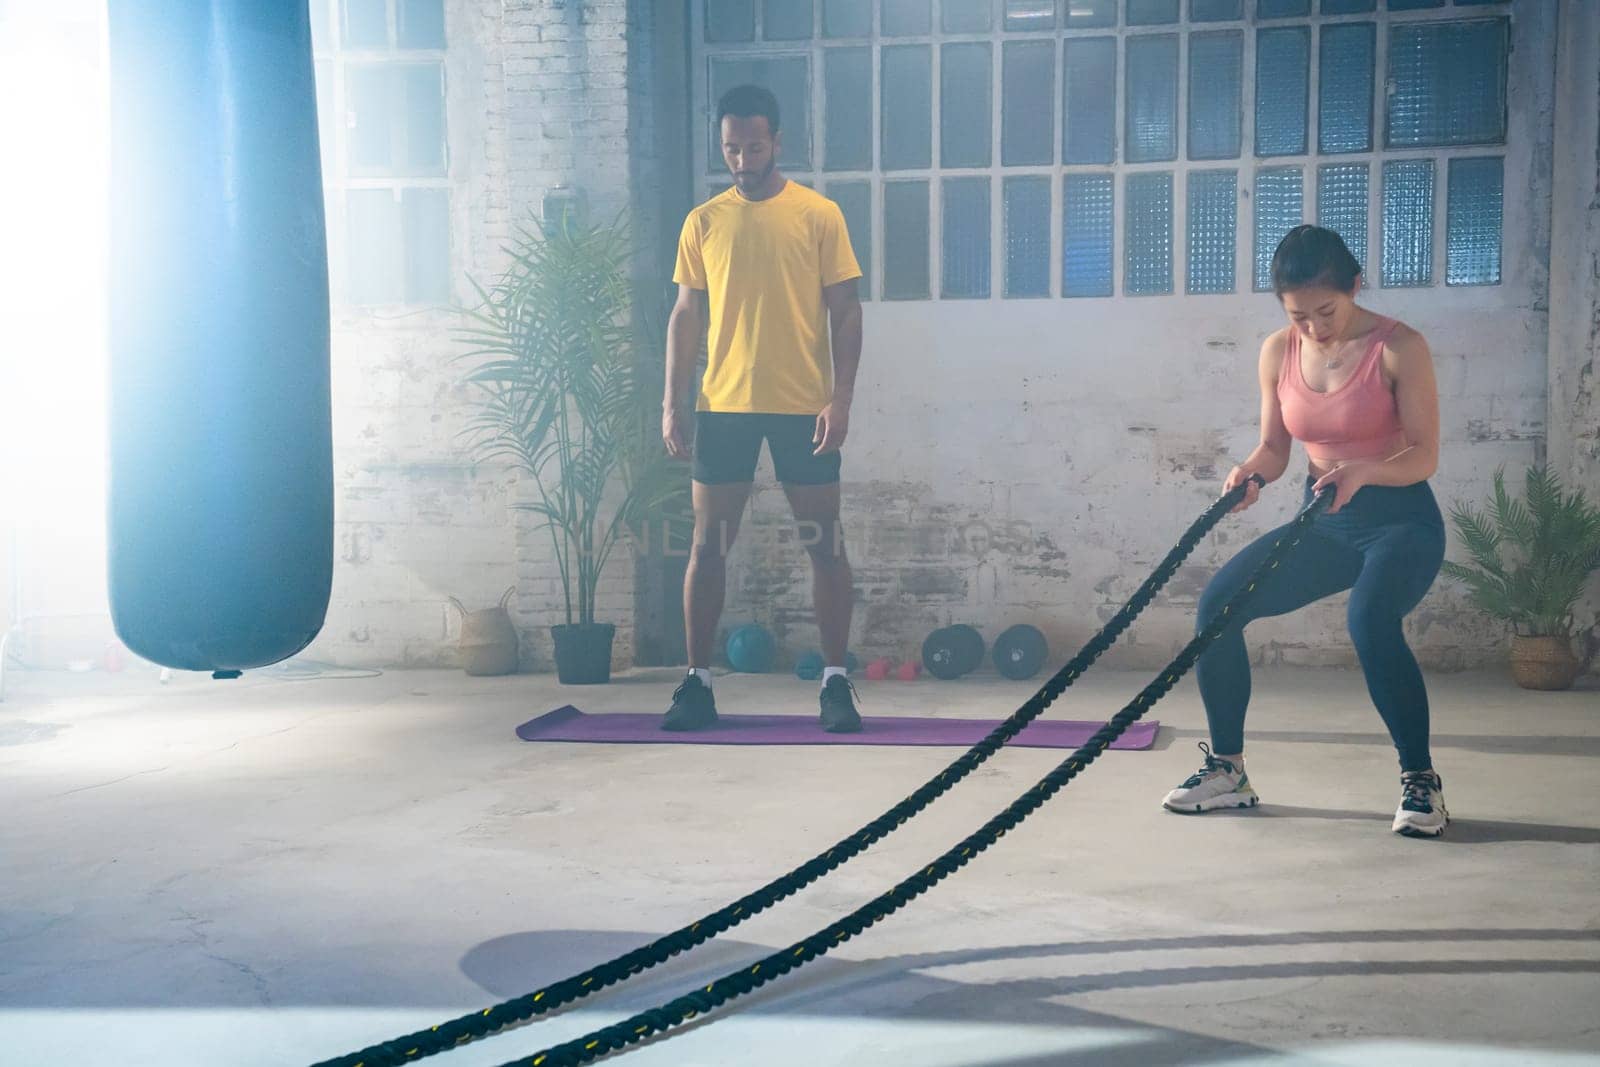 Fitness athletes training using battle ropes intense workout team exercise challenge in gym friends enjoying healthy bodybuilding endurance practice lifestyle together slow motion. High quality 4k footage